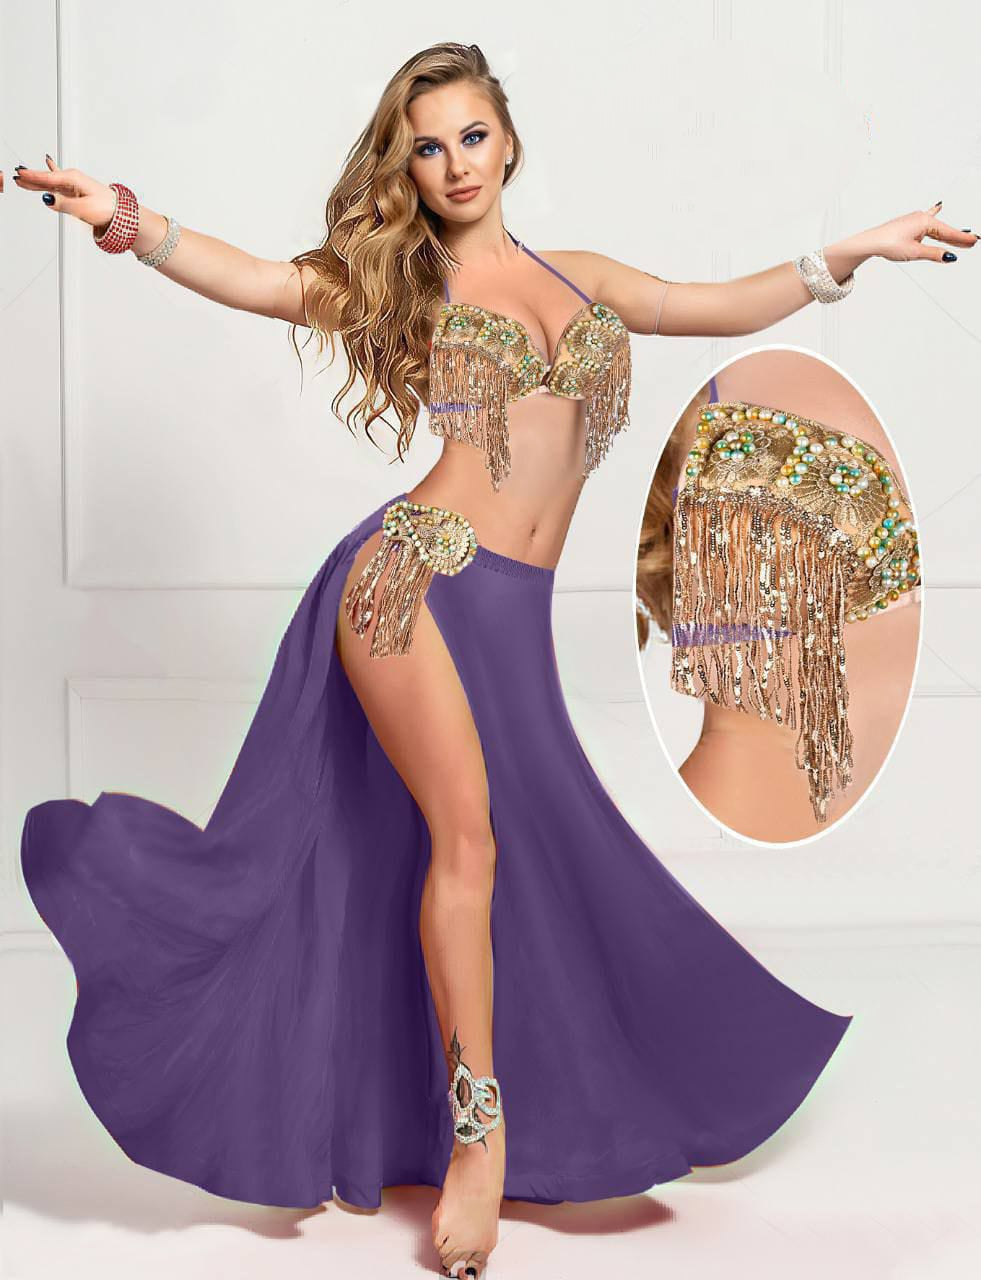 Belly Dance Costume Set For Girls Skirt Performance Suit With Bollywood  Clothes For Stage Dance Wear From Chasebudinger, $22.65 | DHgate.Com